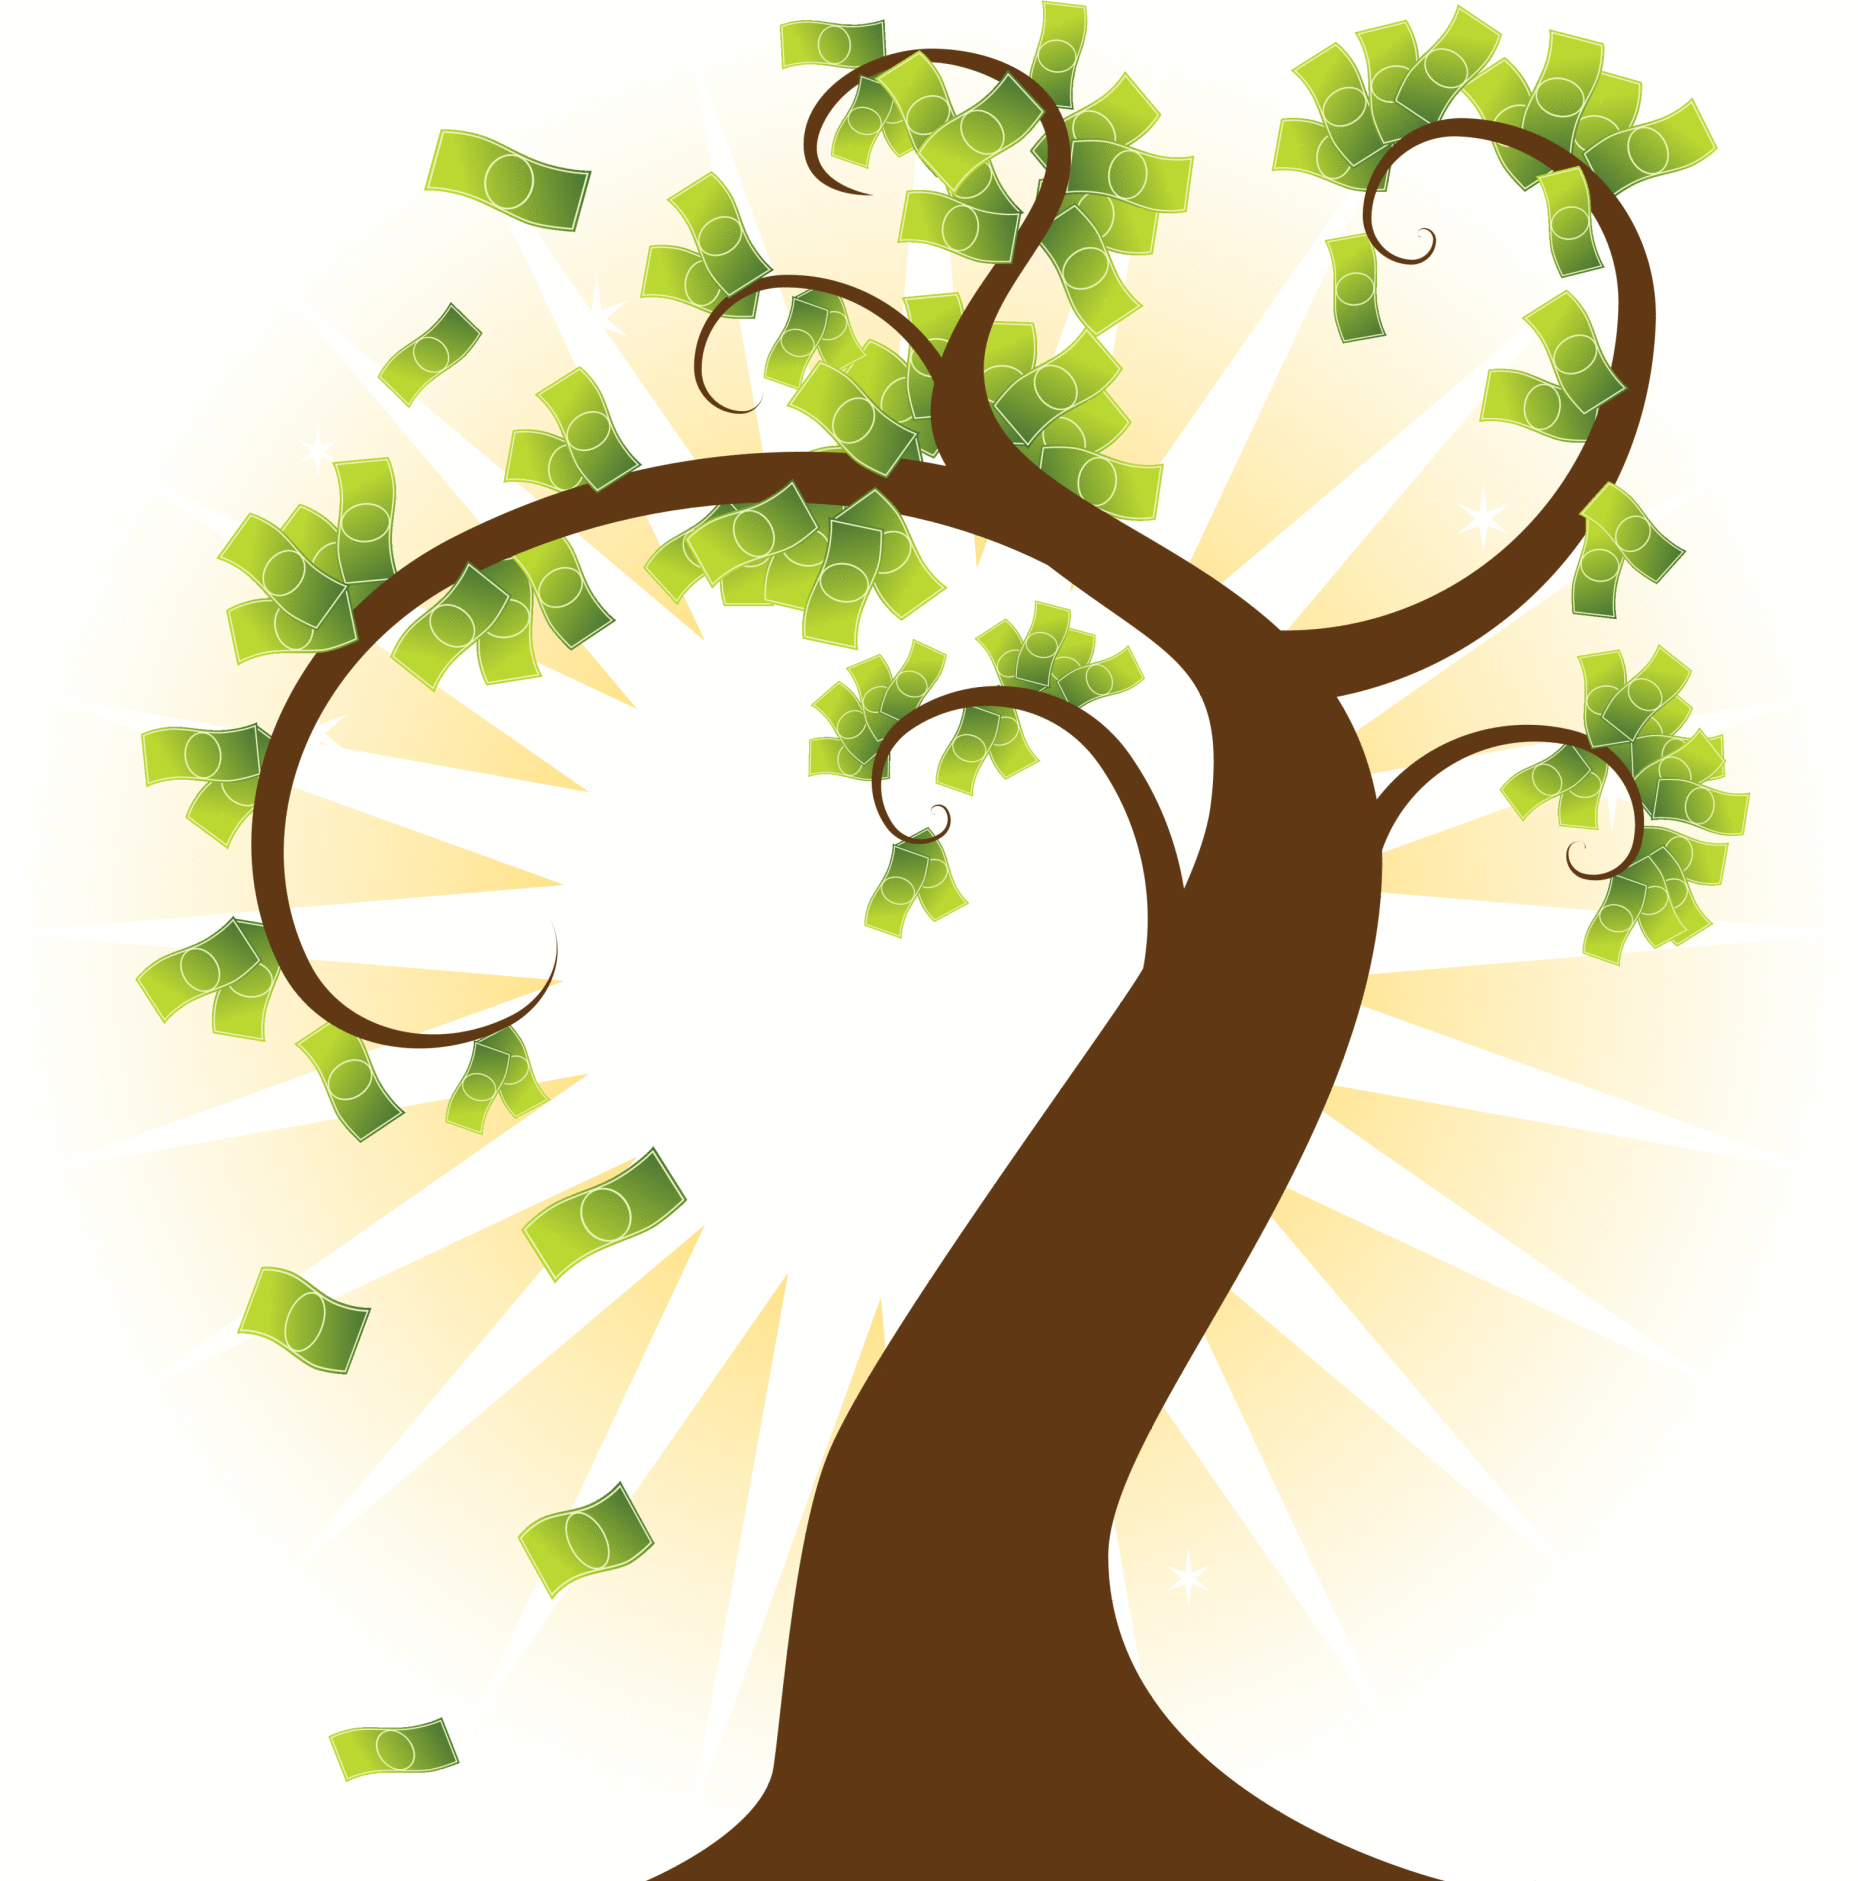 Money Tree Images   Clipart Panda   Free Clipart Images